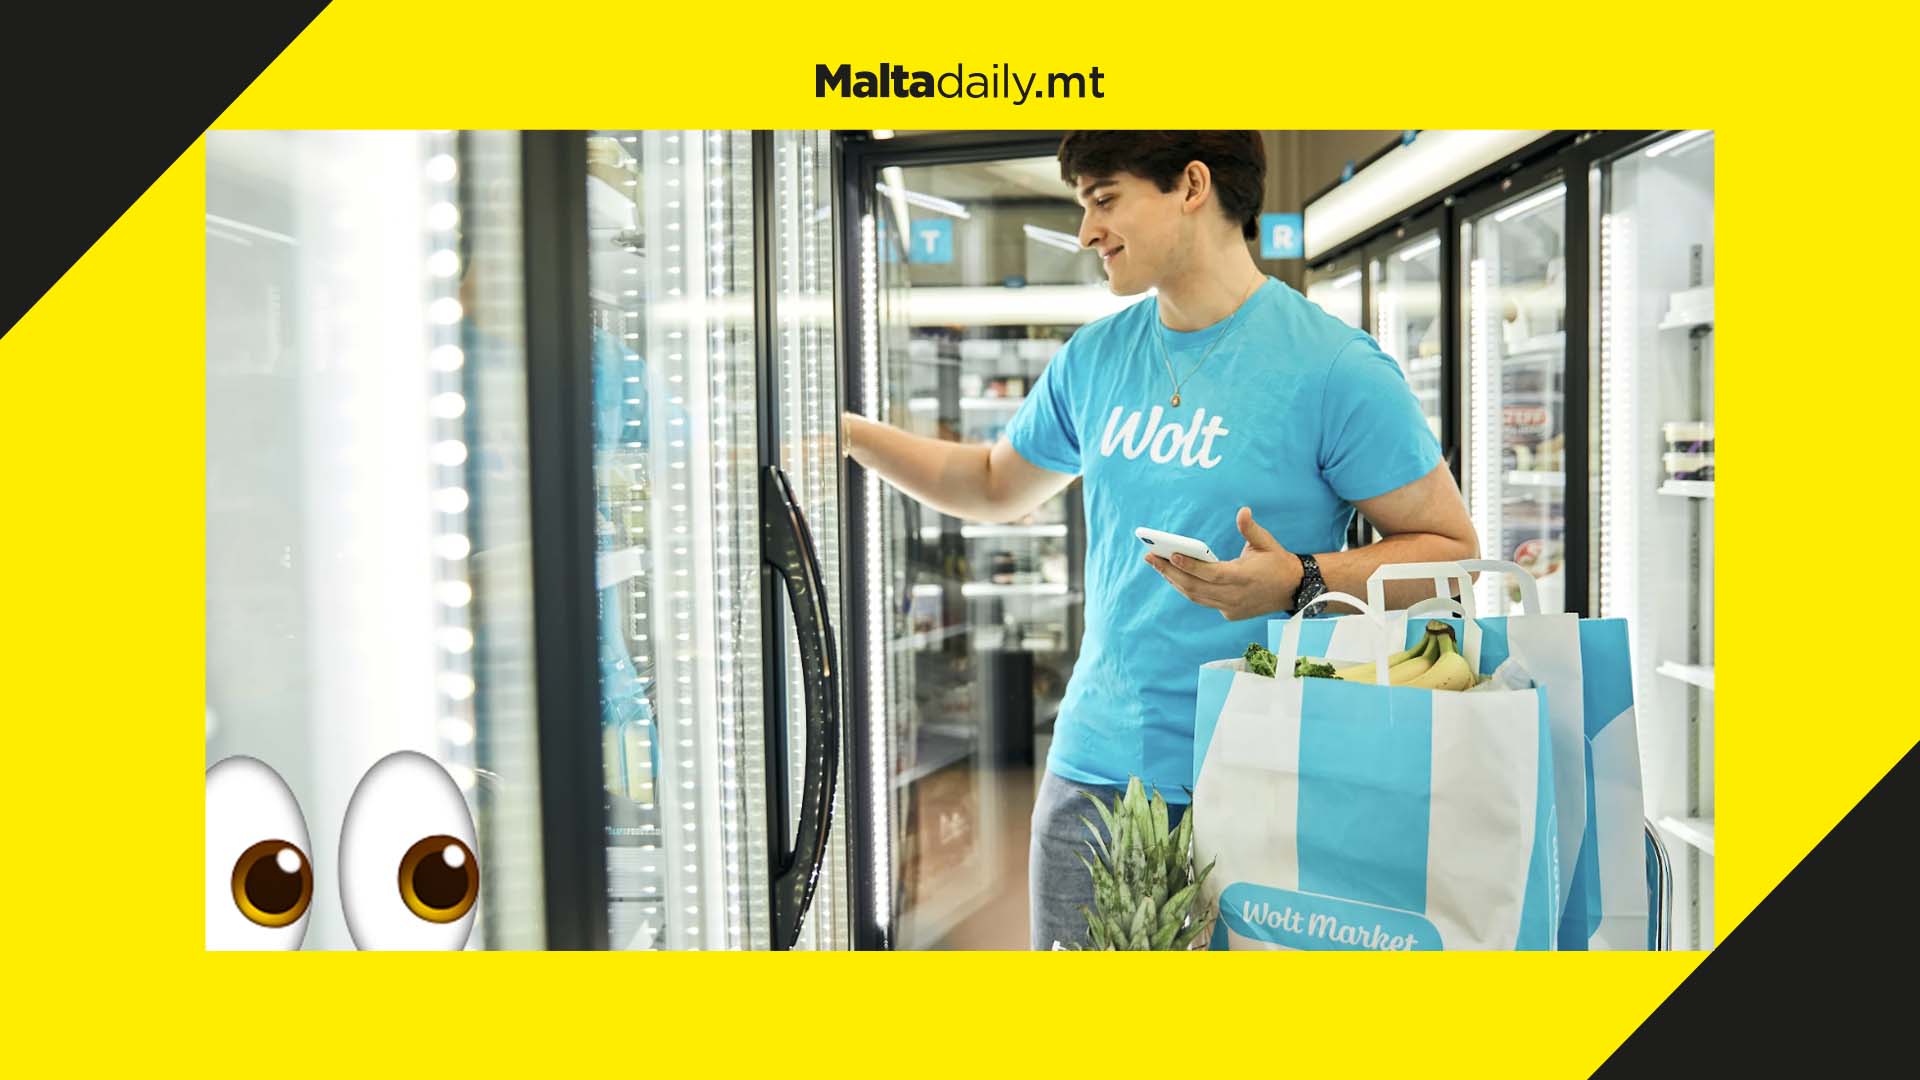 Wolt Market opens its first delivery-only grocery store in Malta